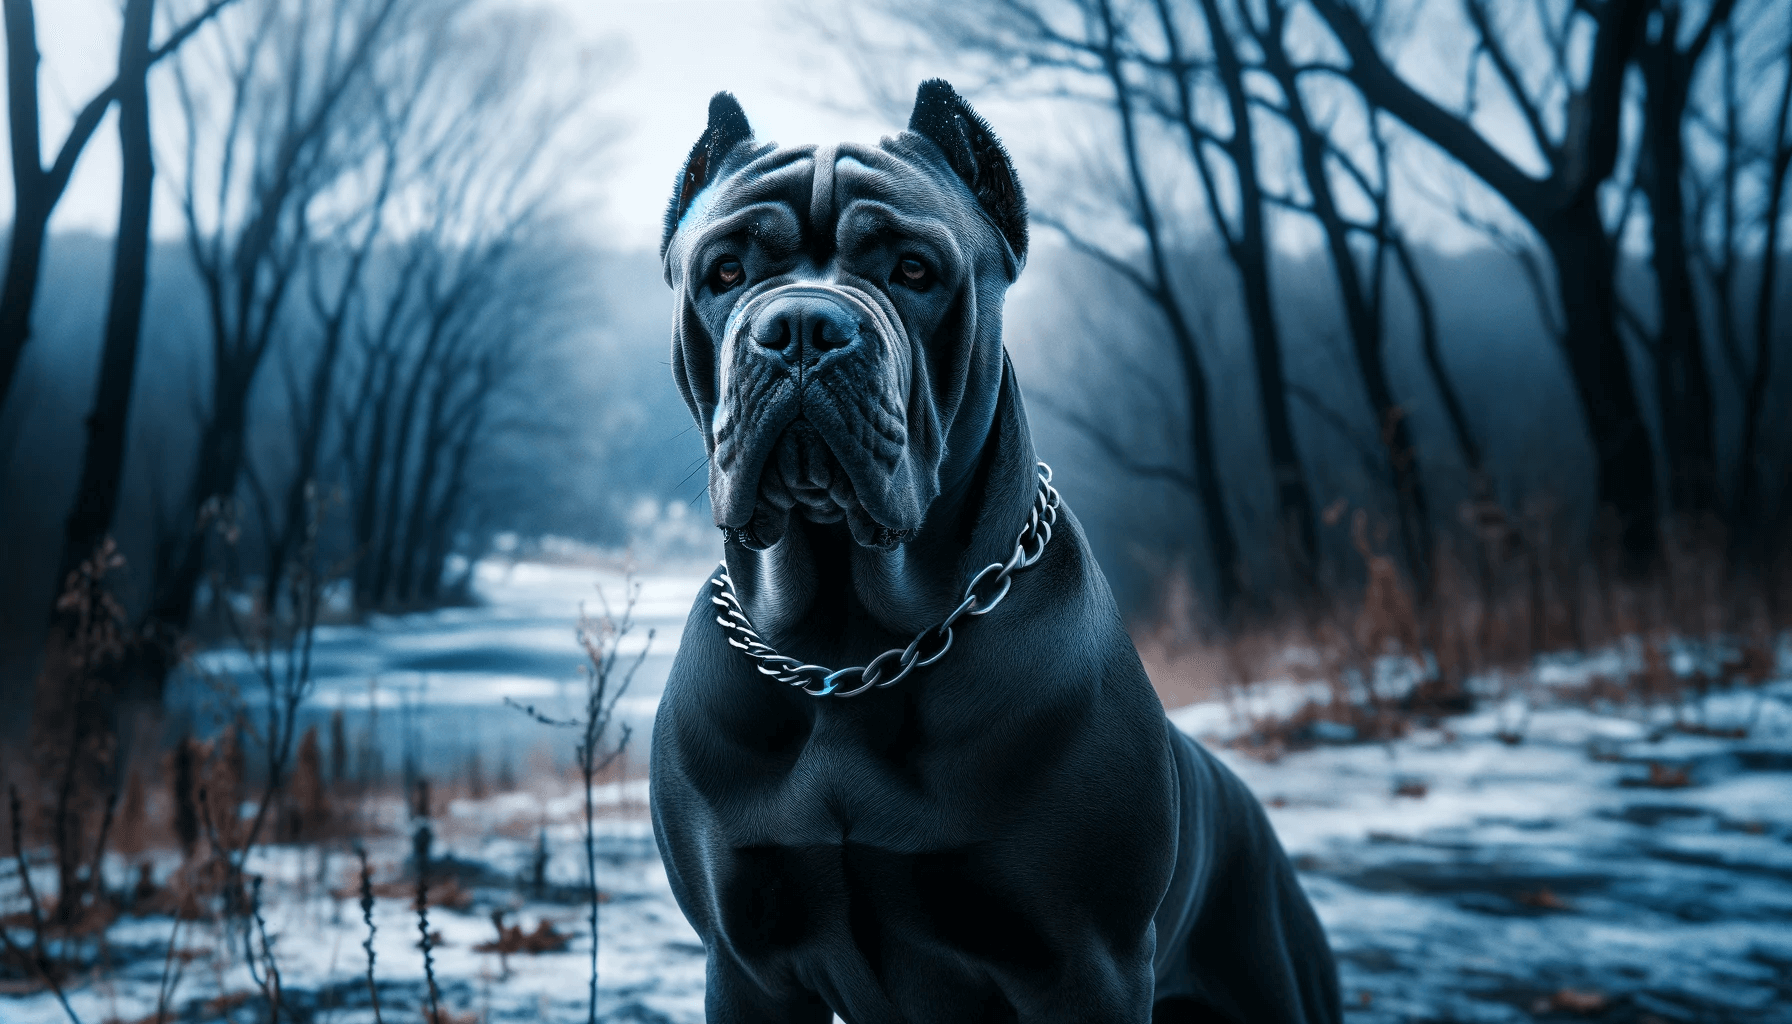 Blue Cane Corsos with a Shiny Blue-Gray Coat Wearing a Chain Collar Standing Firmly with a Strong Watchful Gaze in a Stark Landscape